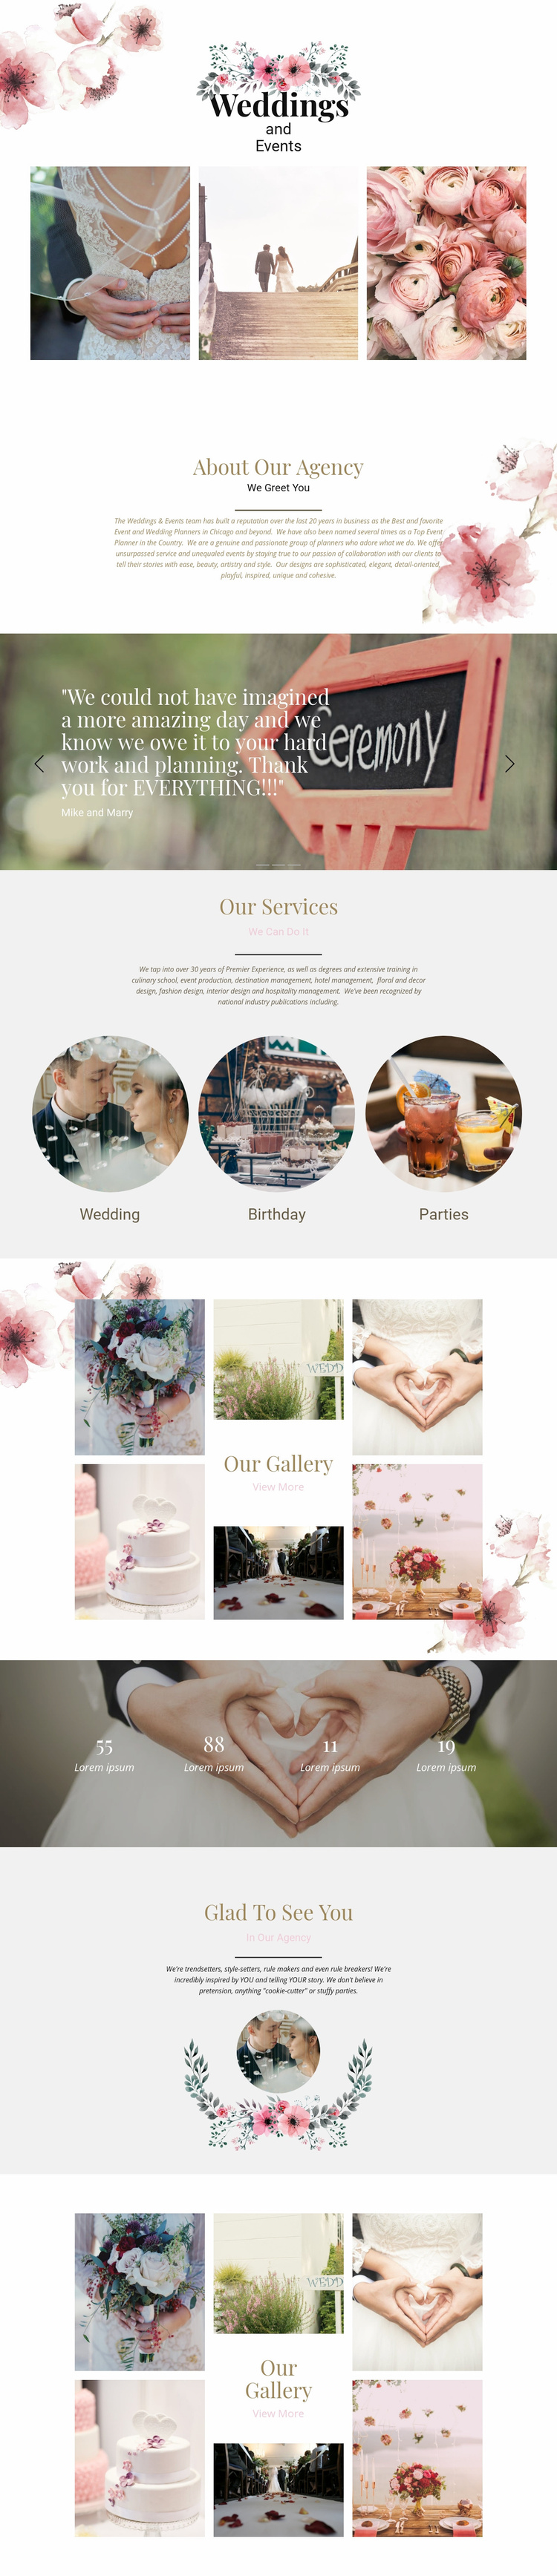 Moments of wedding Wix Template Alternative